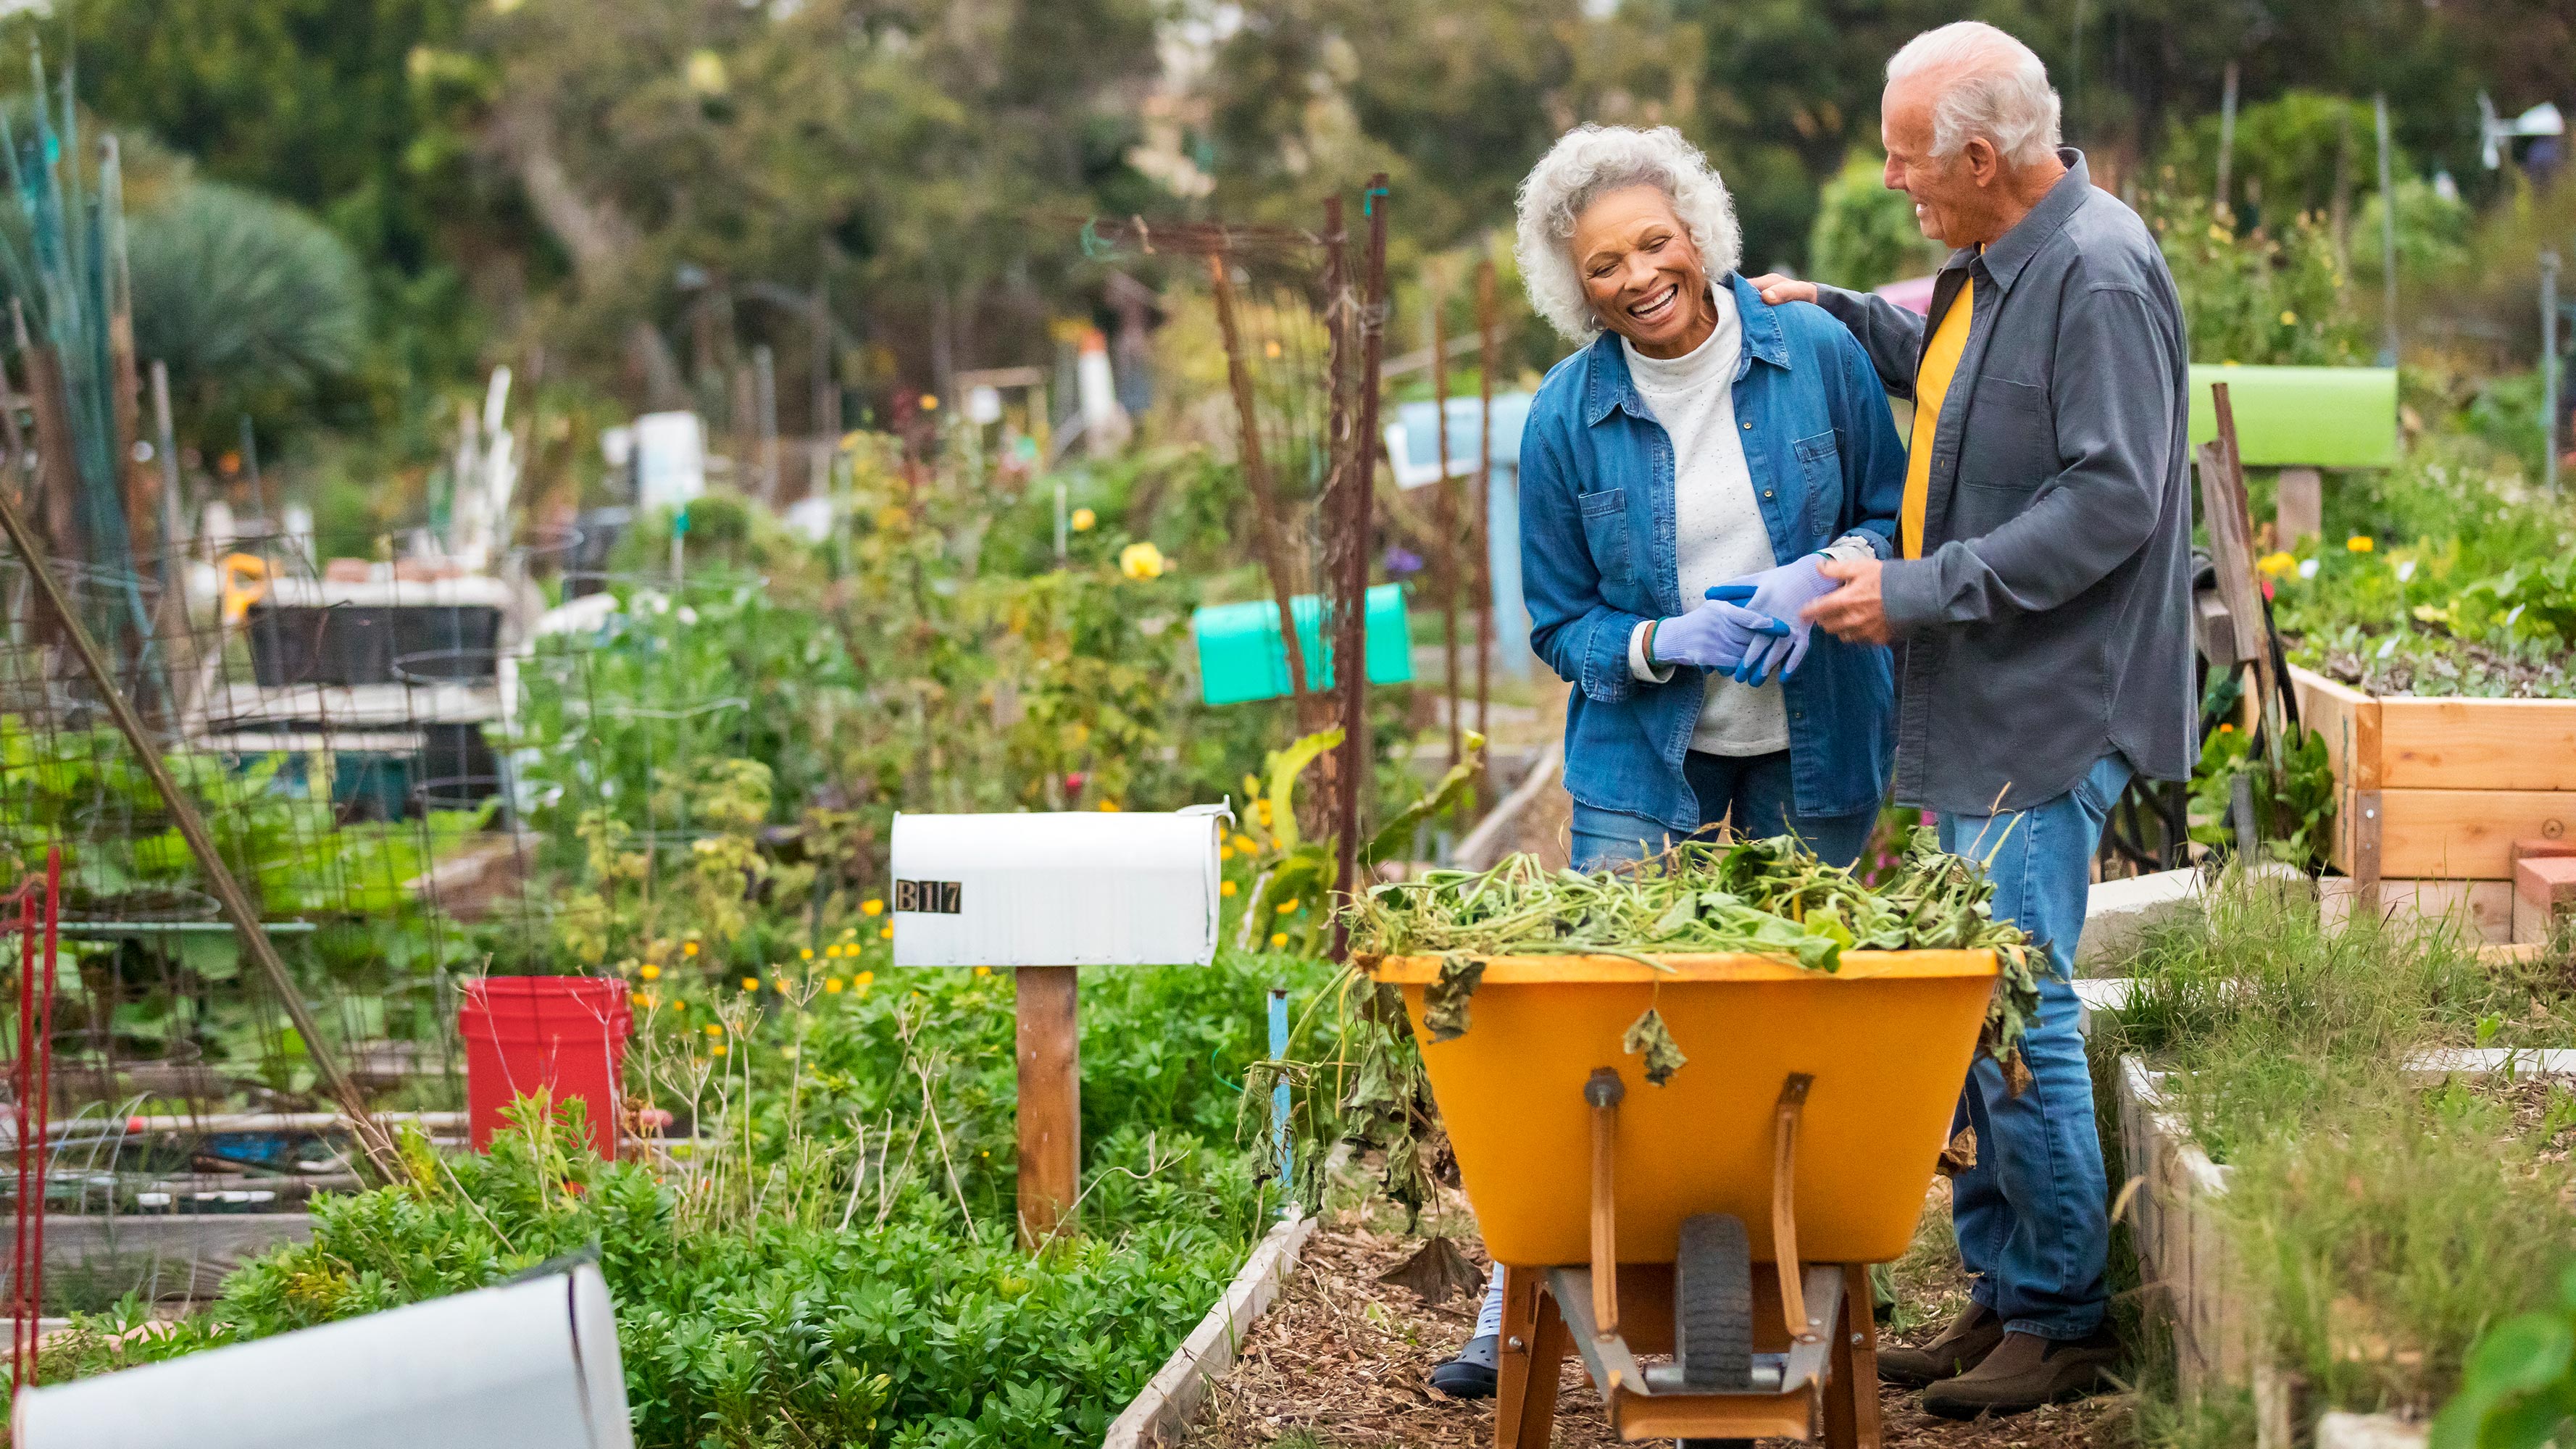 An older couple working in a garden plot laughing with each other